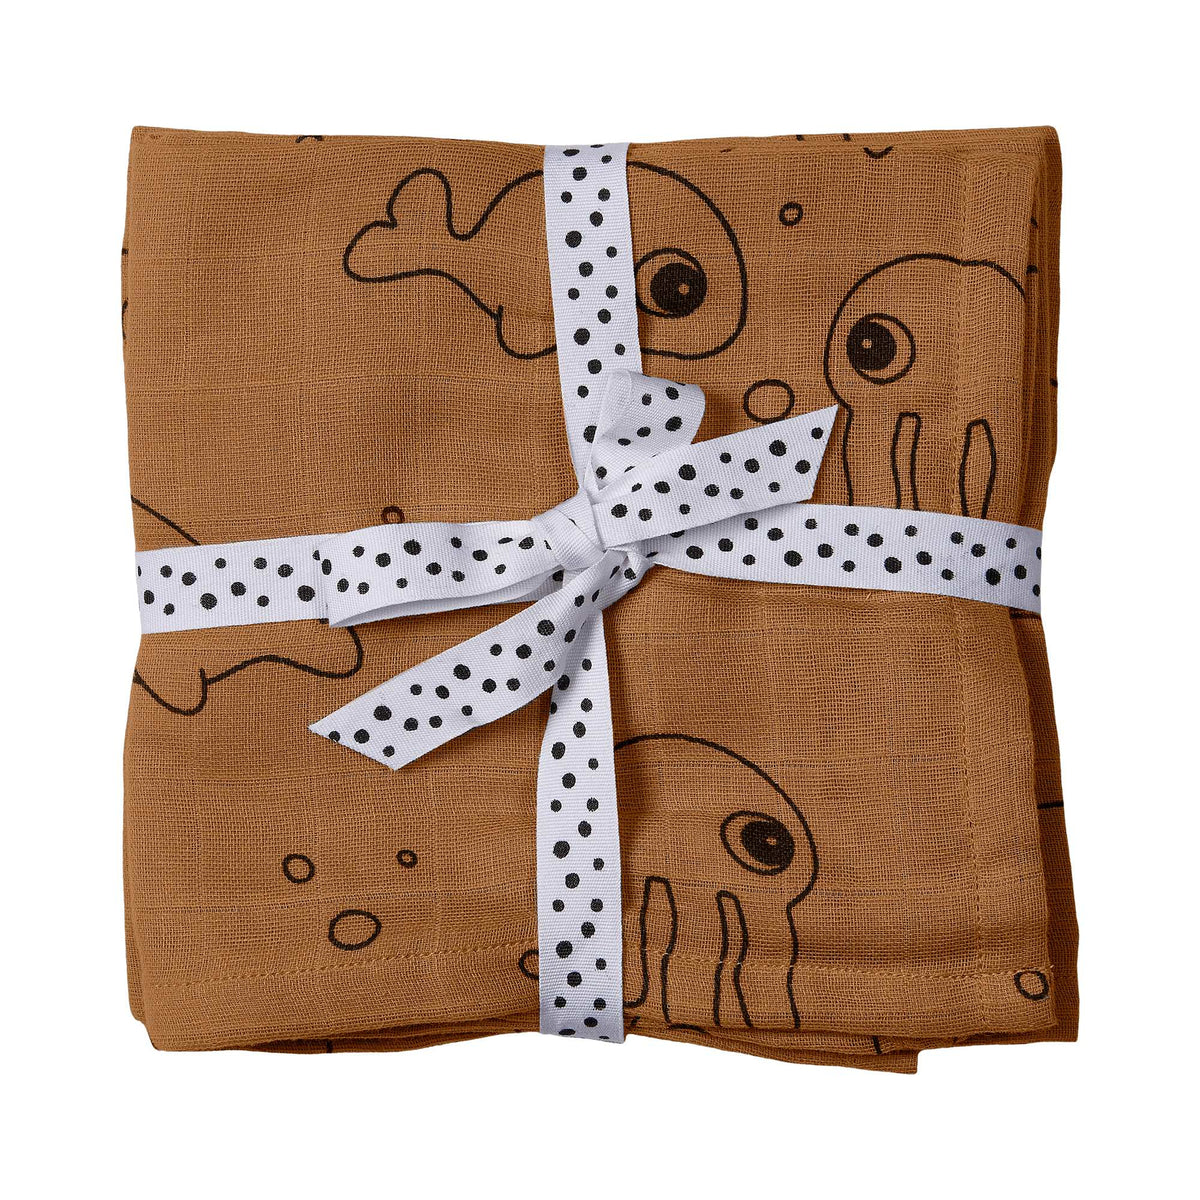 Swaddle 2-pack - Sea friends - Mustard - Front